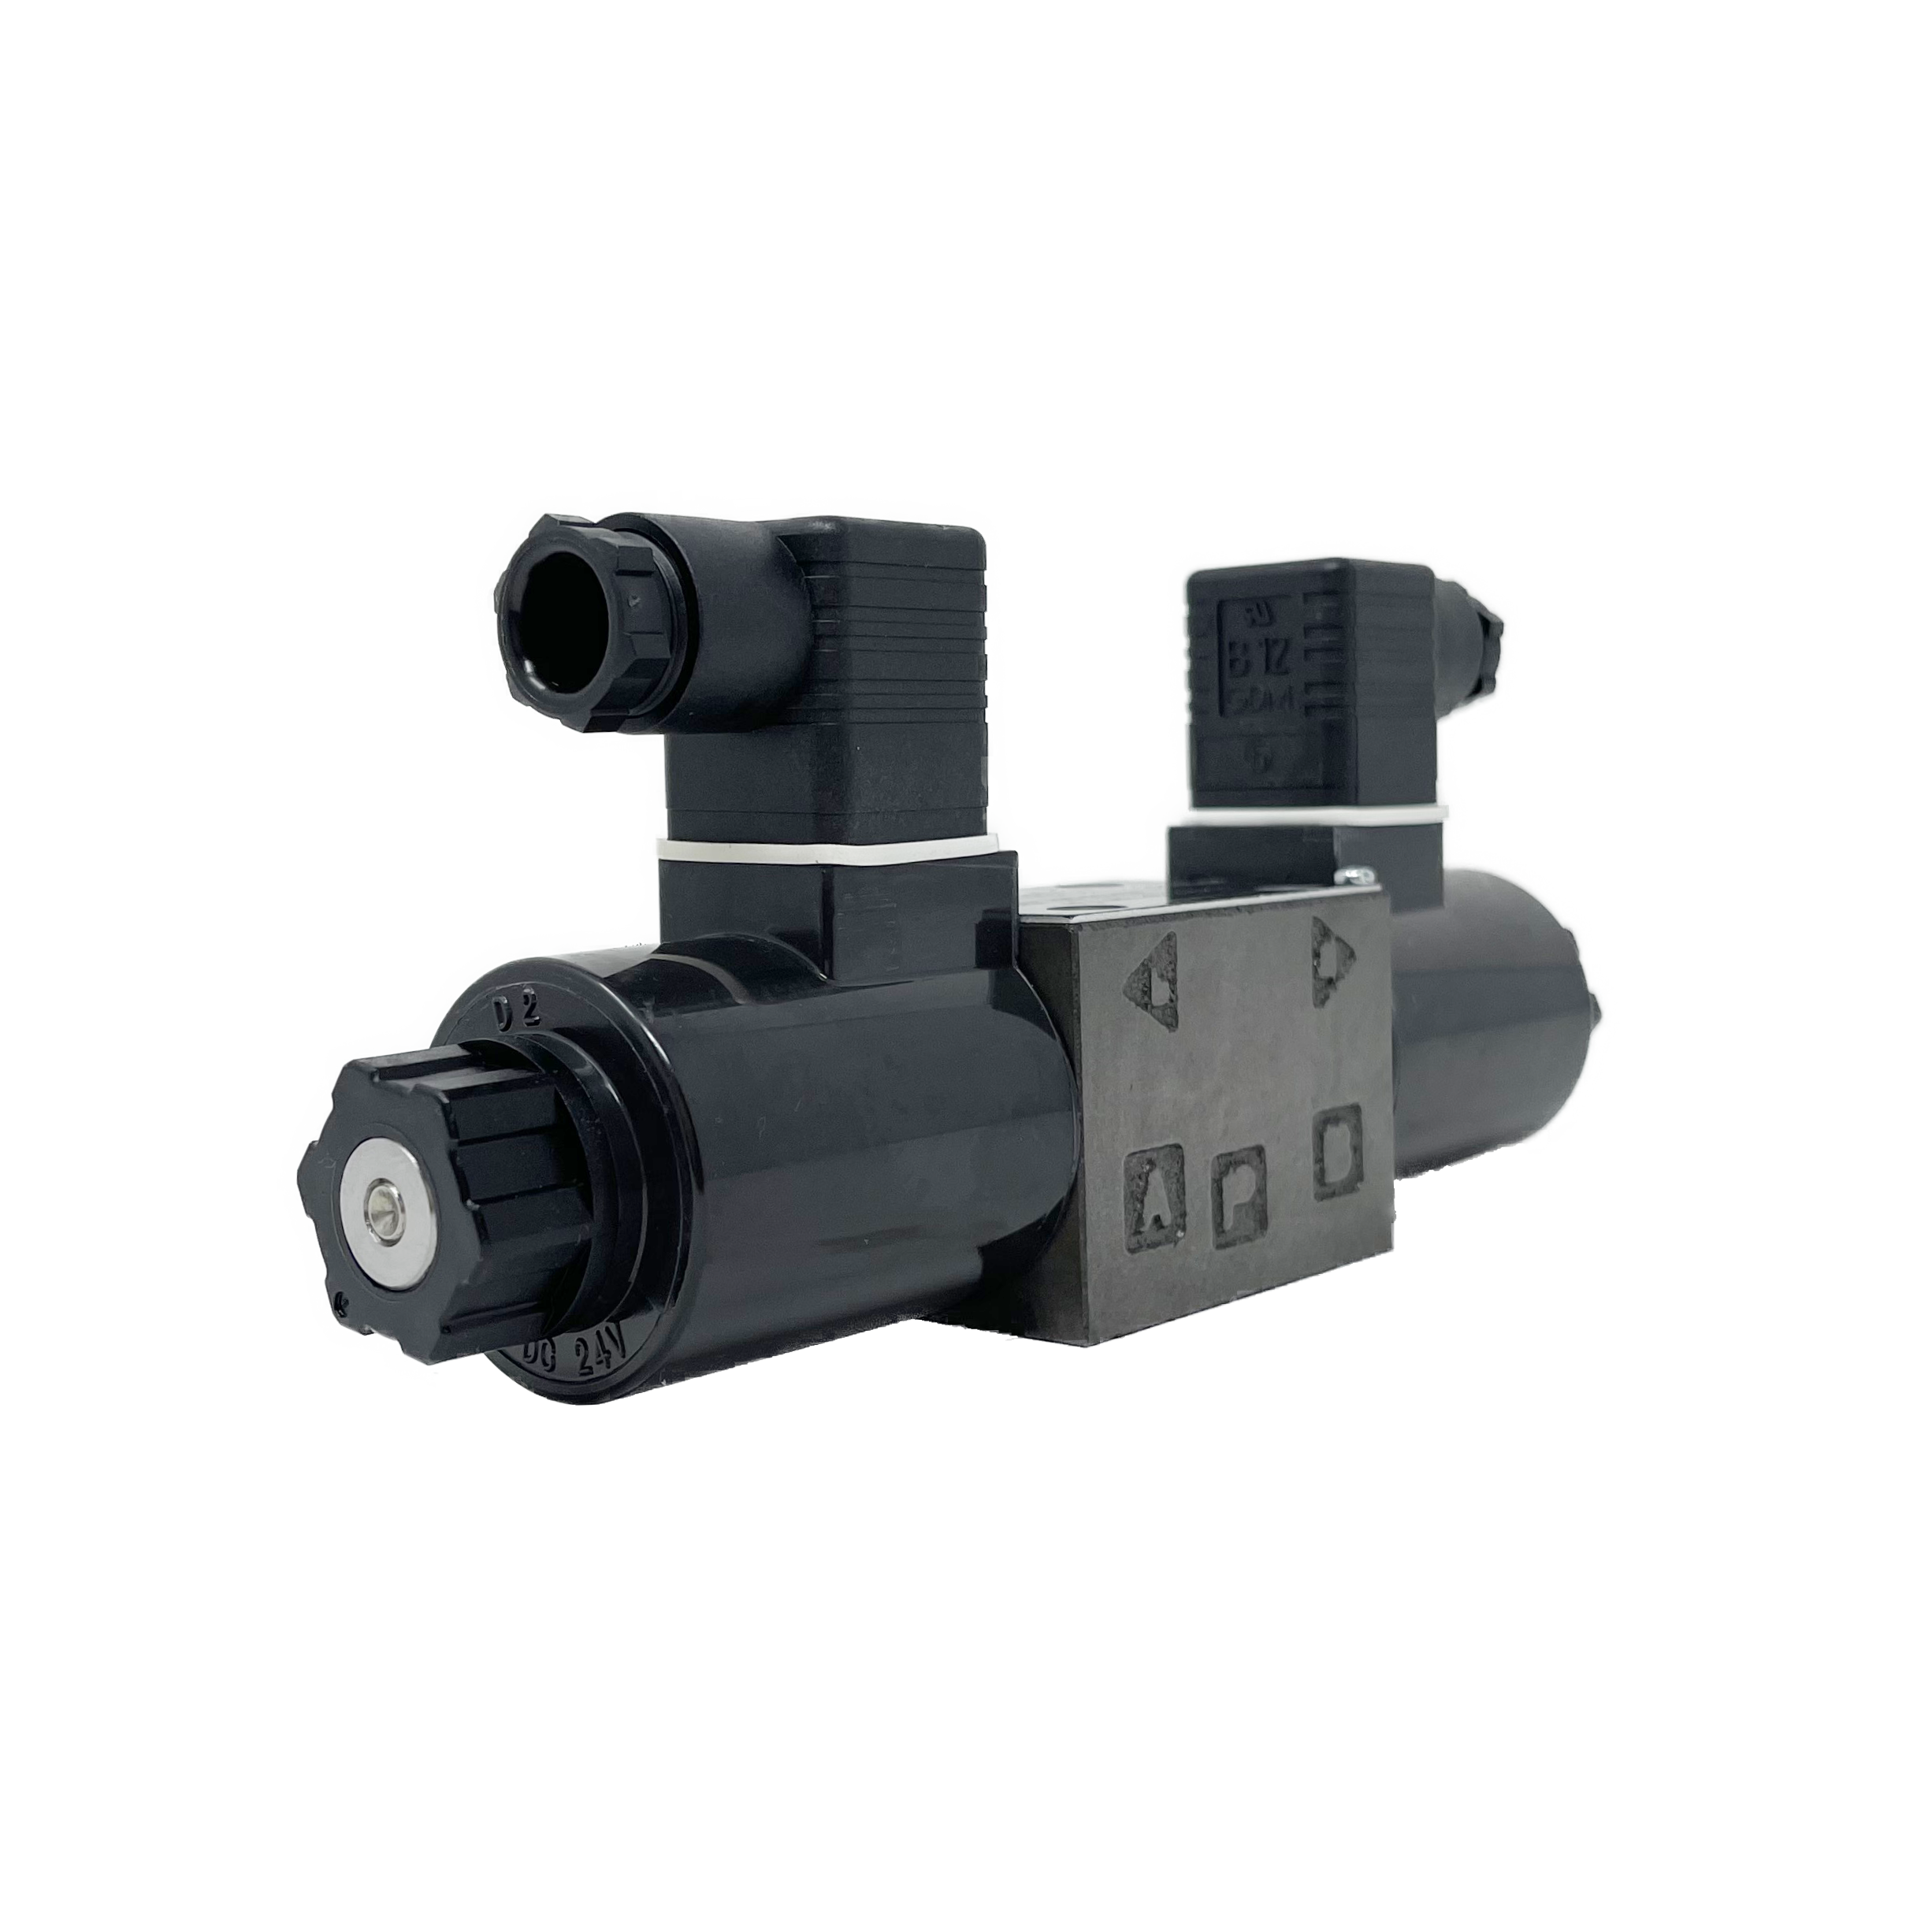 SA-G01-C7Y-D1-E31 : Nachi Solenoid Valve, 3P4W, D03 (NG6), 13.2GPM, 5075psi, P to T with A & B Blocked in Neutral, 12 VDC, DIN